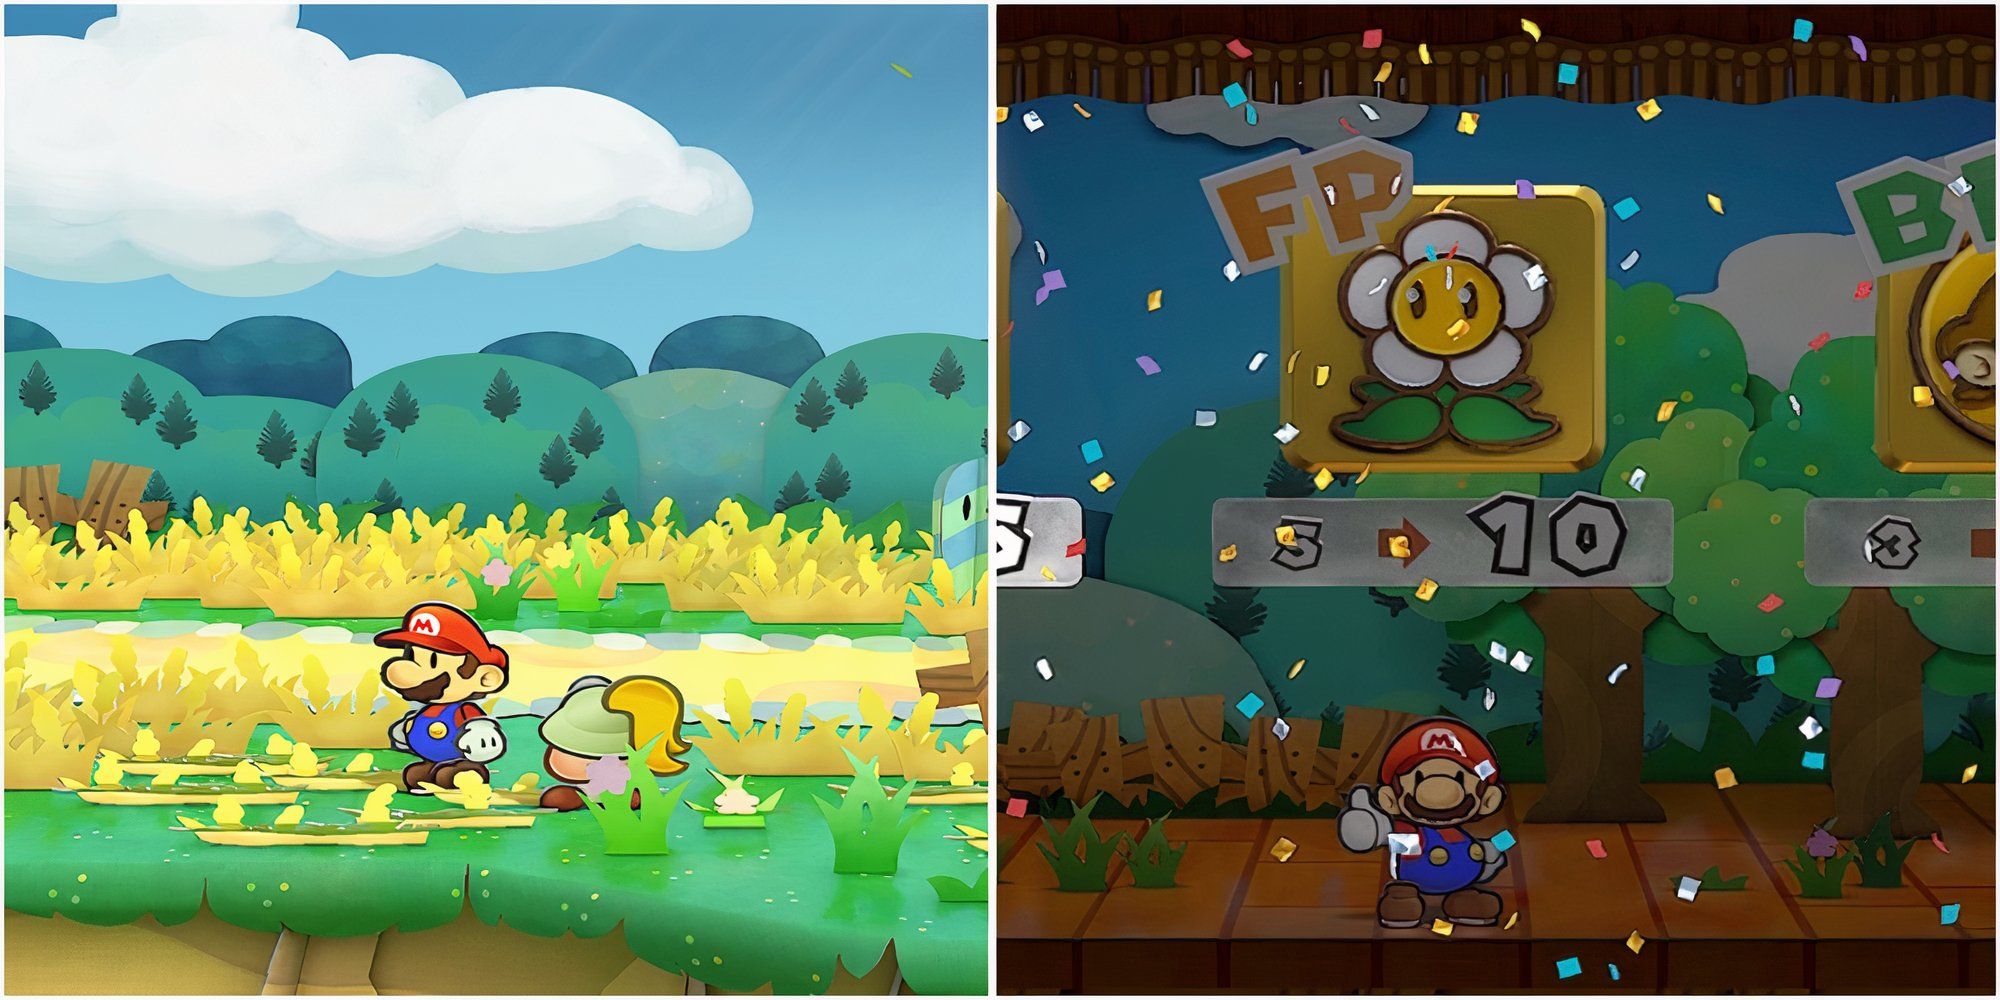 Exploring Petal Meadows and Blowing a panel with Flurrie in Paper Mario The Thousand-Year Door